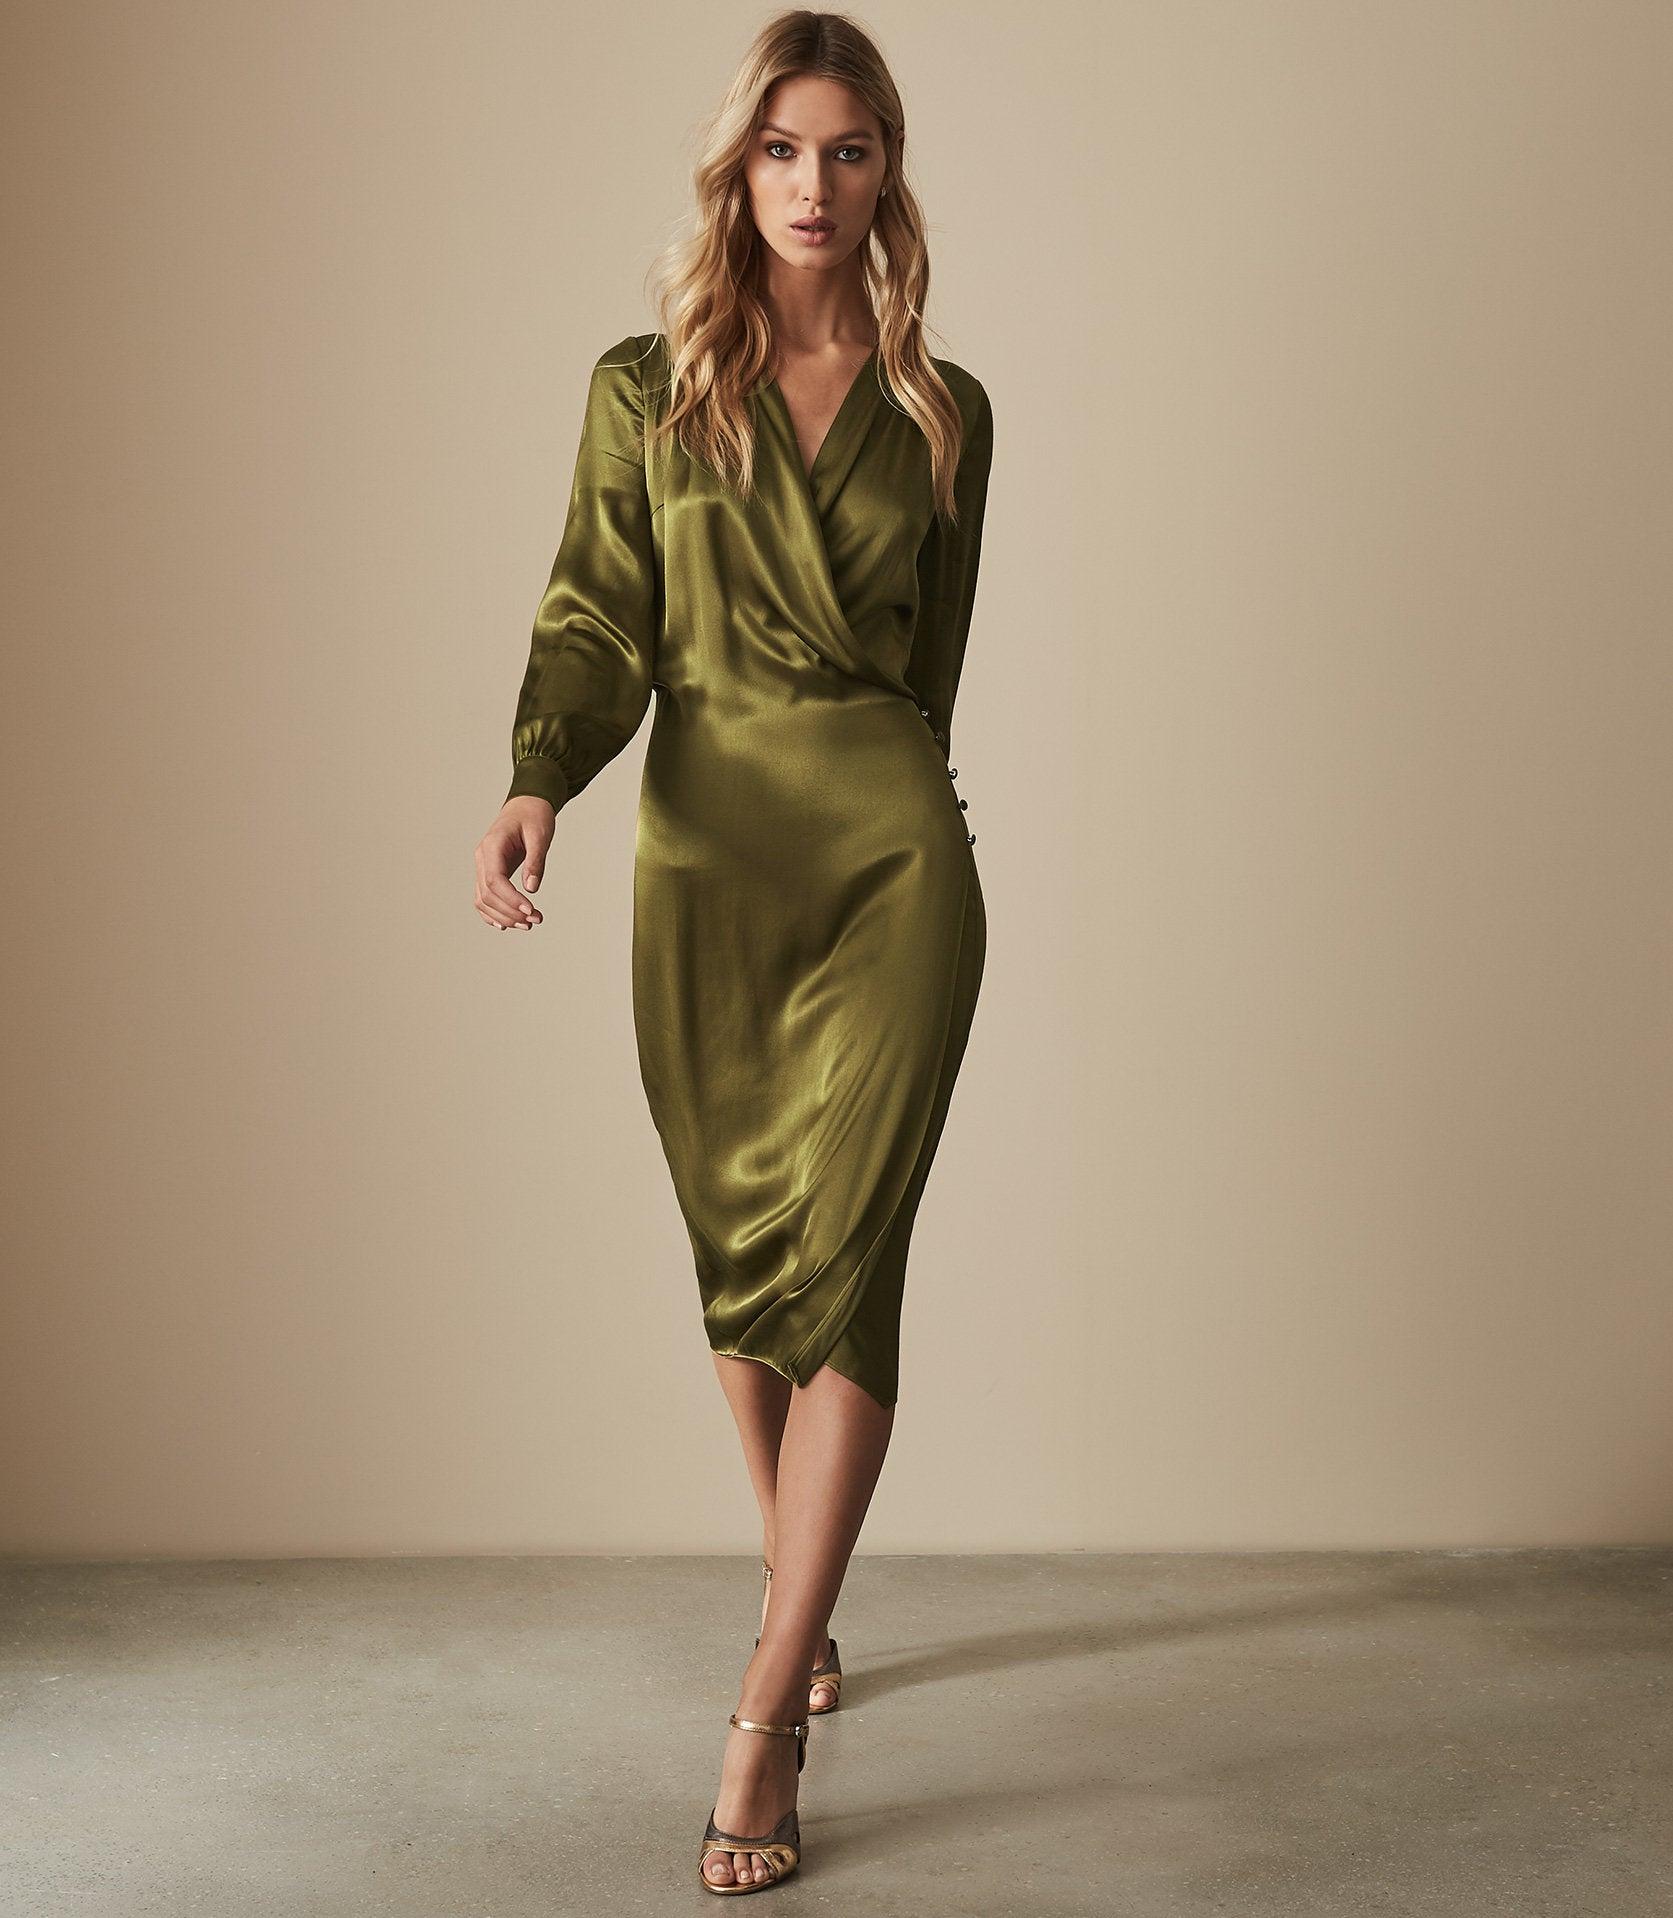 Reiss Synthetic Satin Wrap Dress in ...